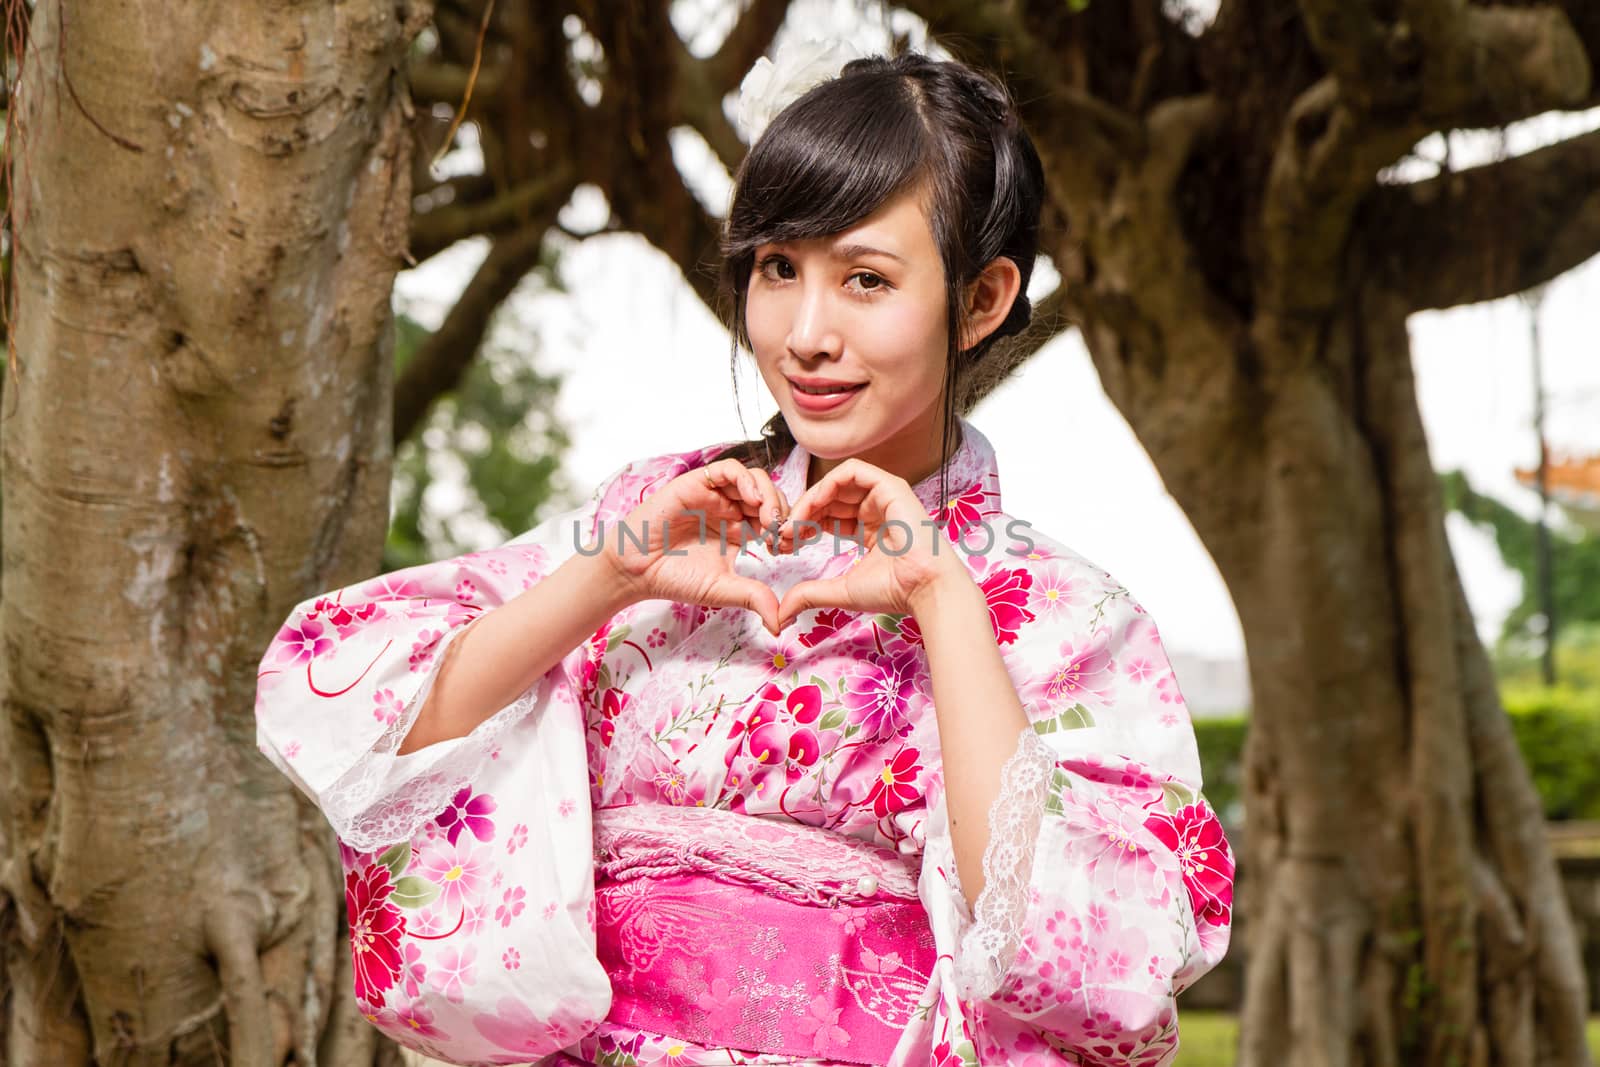 Asian woman in kimono by trees in garden, making a heart with her hands